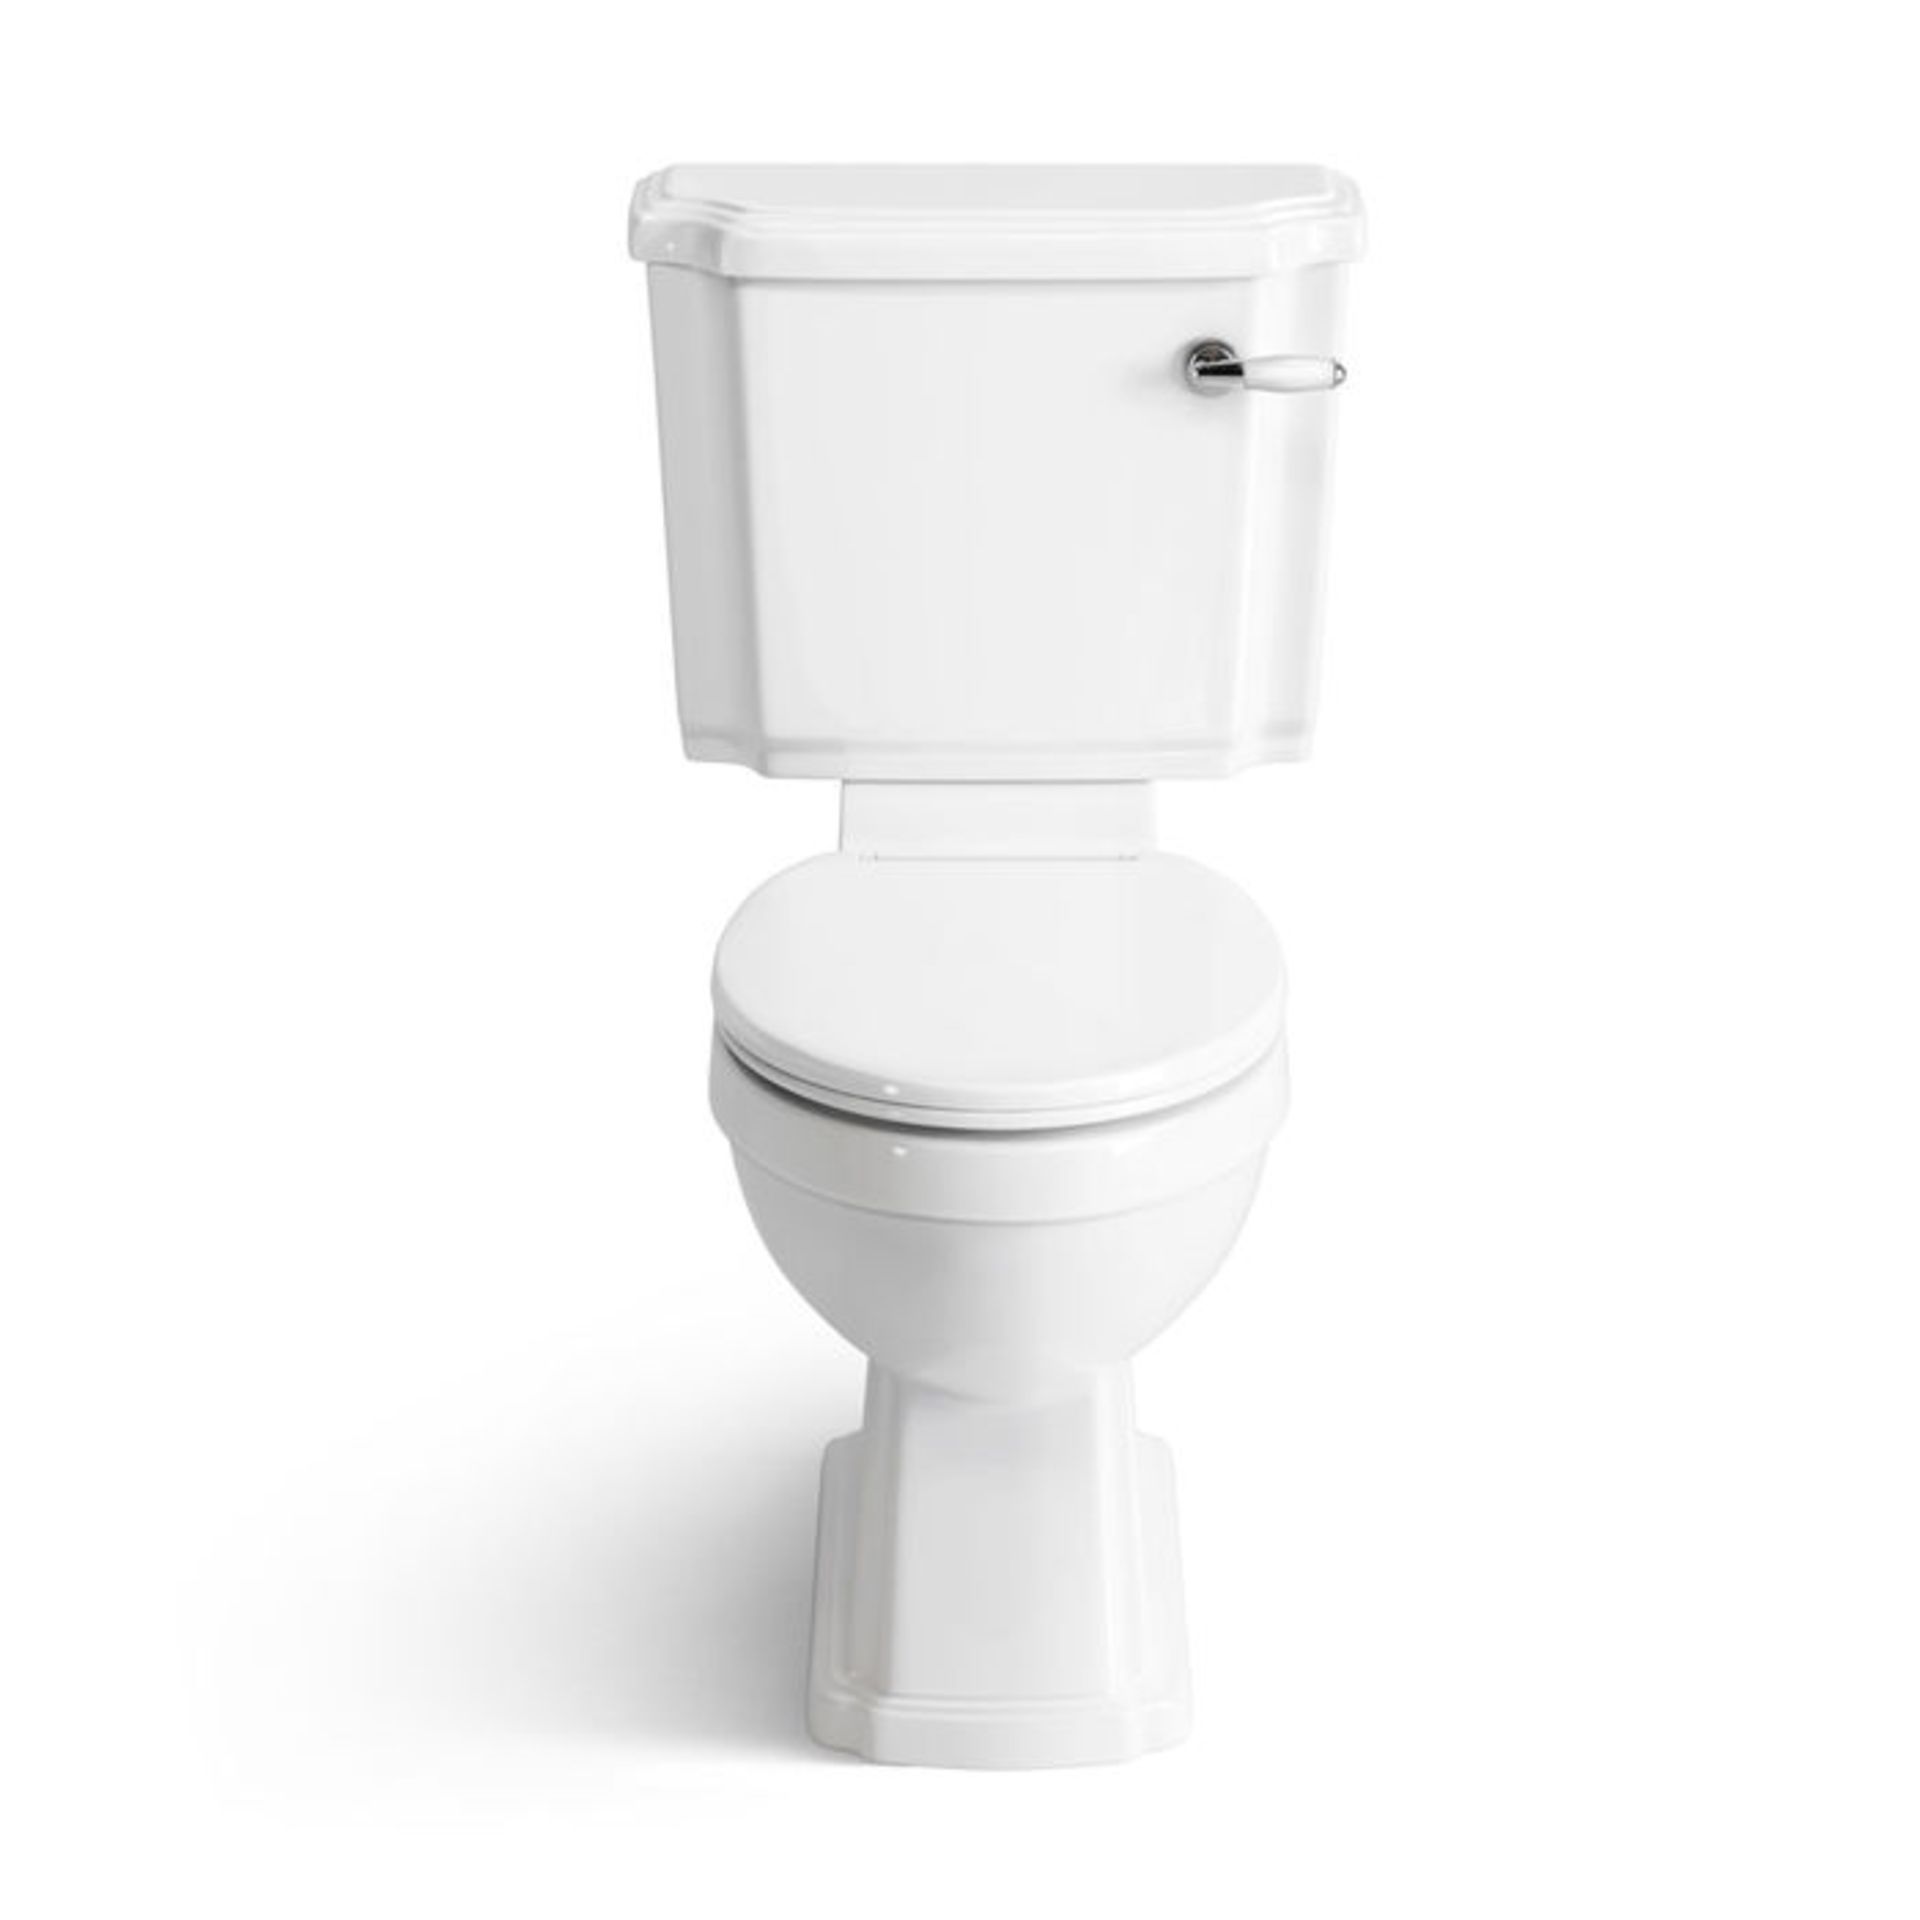 NEW & BOXED Cambridge Traditional Close Coupled Toilet & Cistern - White Seat. CCG629PAN.Trad... - Image 3 of 3